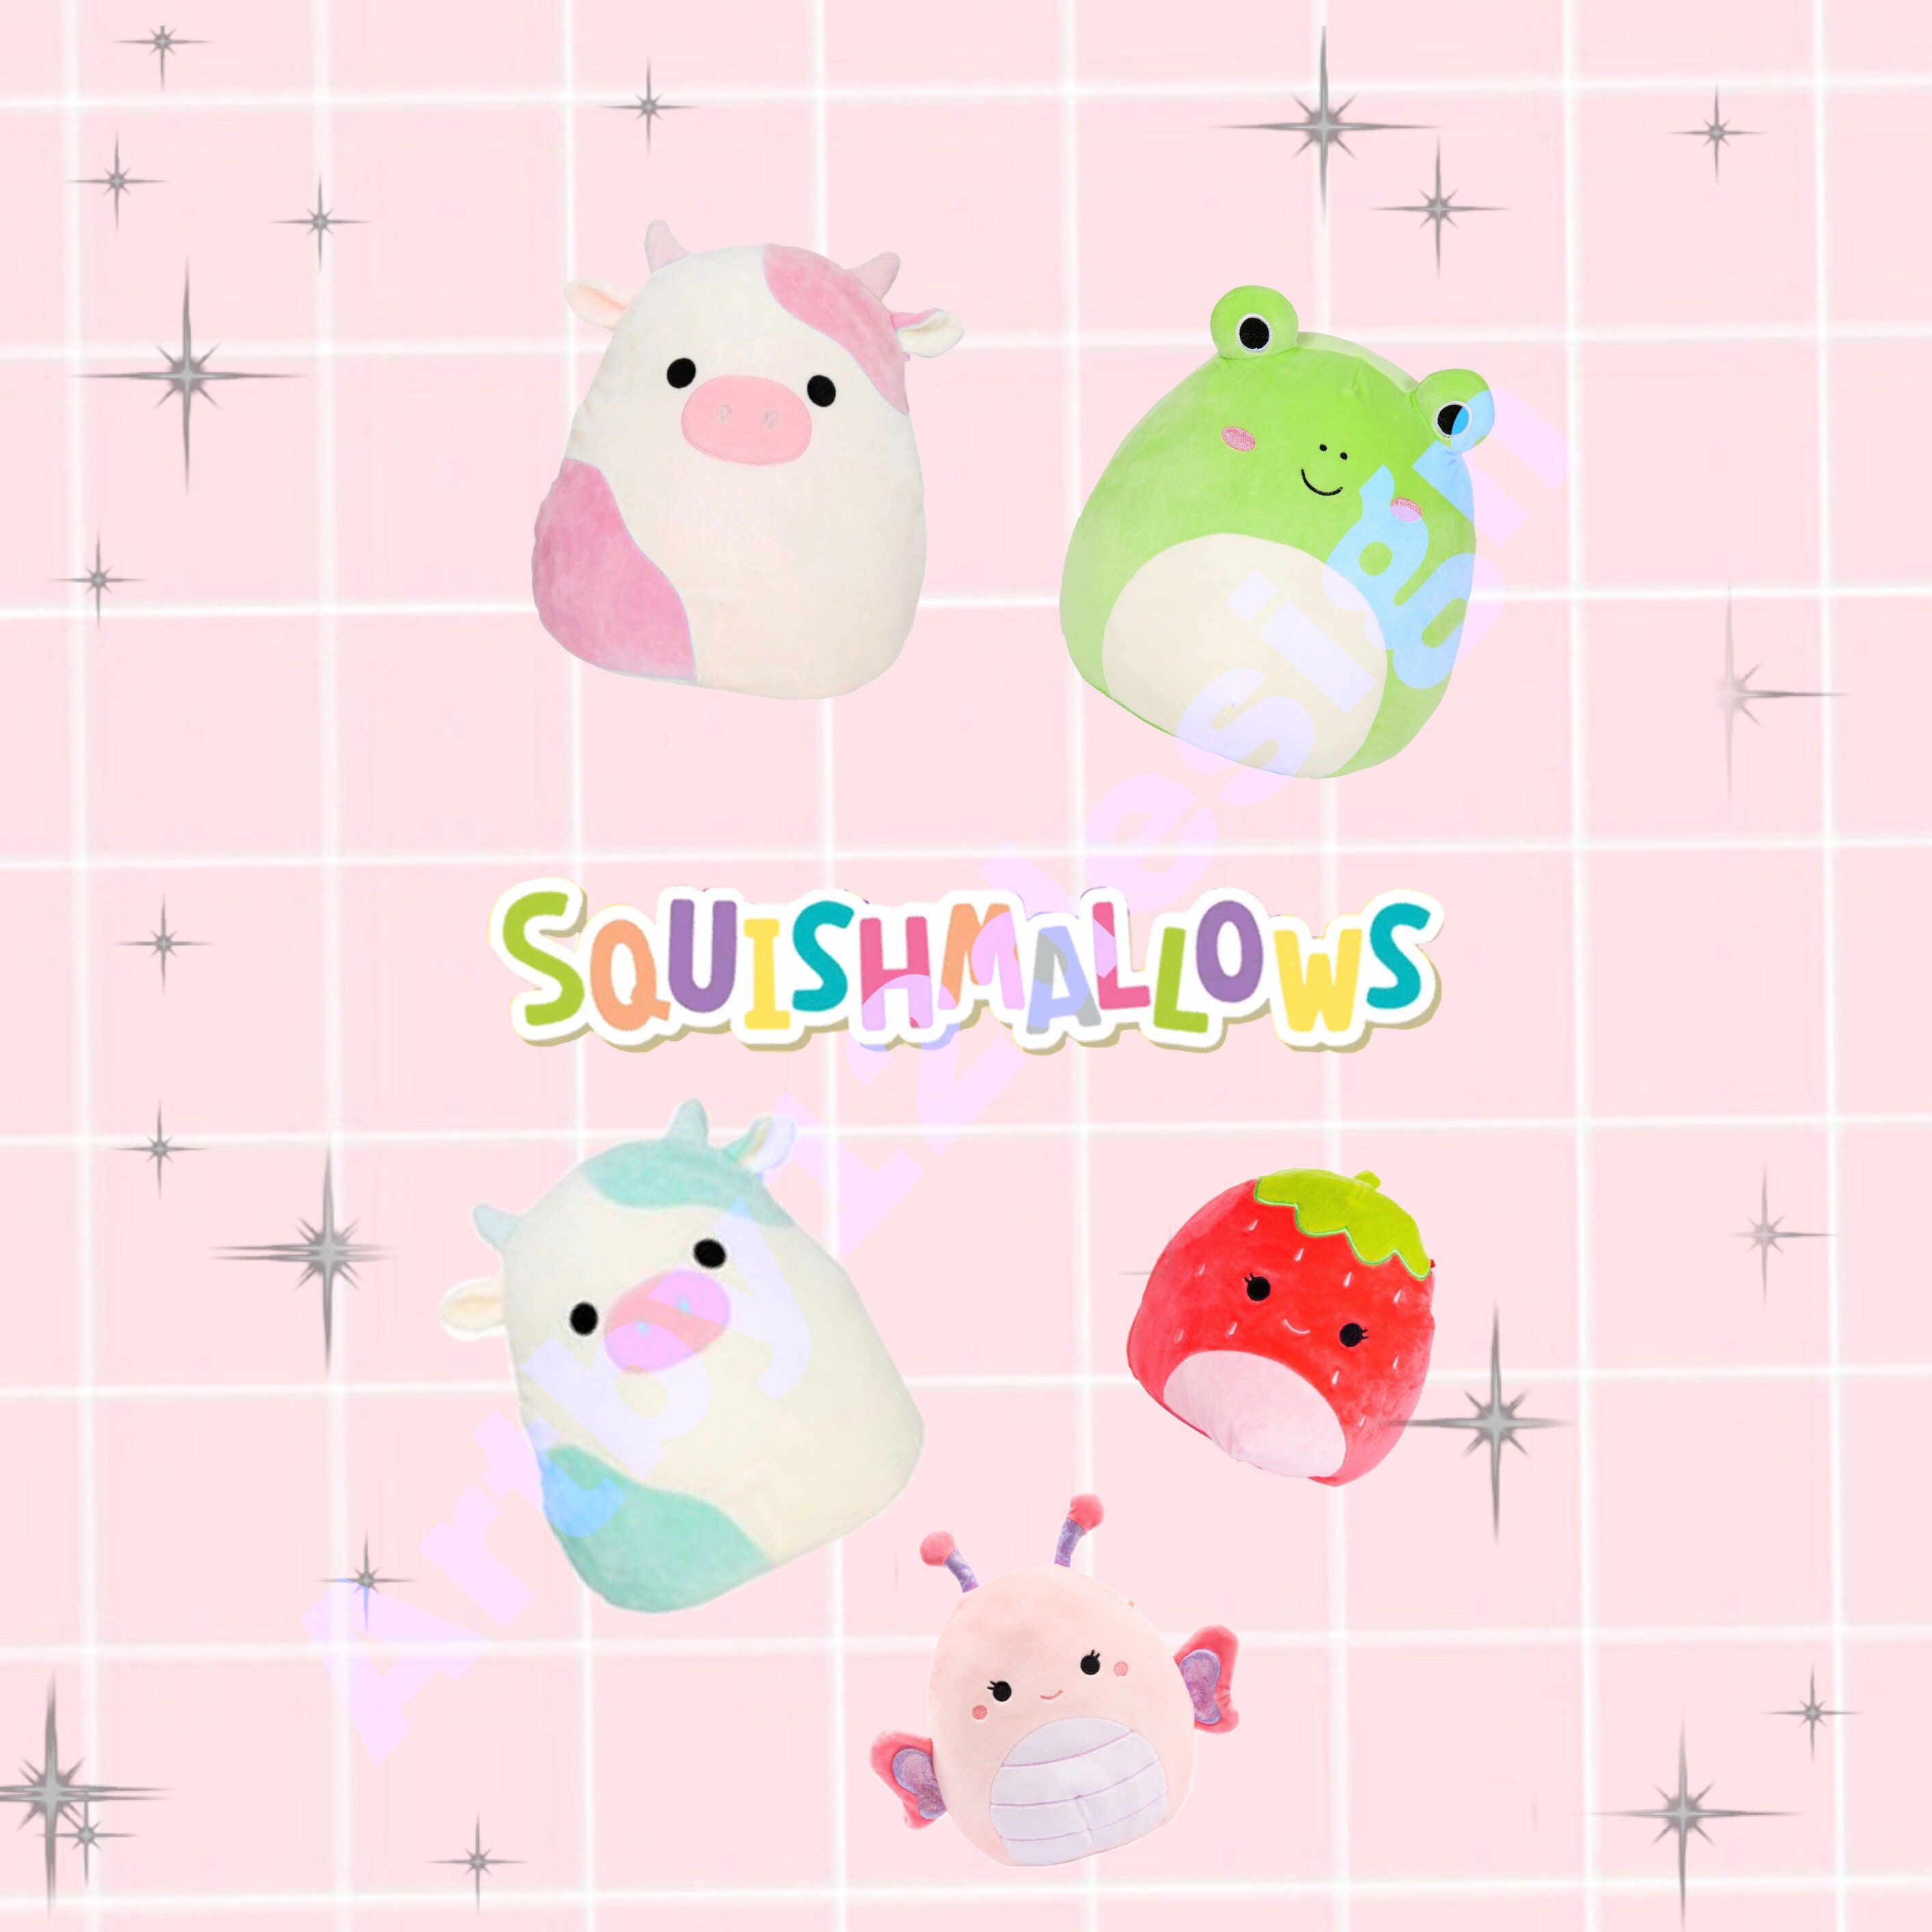 A pink background with white grid lines and stars. In the center, there are five Squishmallows stuffed animals. From top left, there is a cow with a pink and white striped horn, a green frog with a white belly, a pink pig with a white curly tail, a strawberry with a pink bow, and a bee with a pink body and white wings. - Preppy